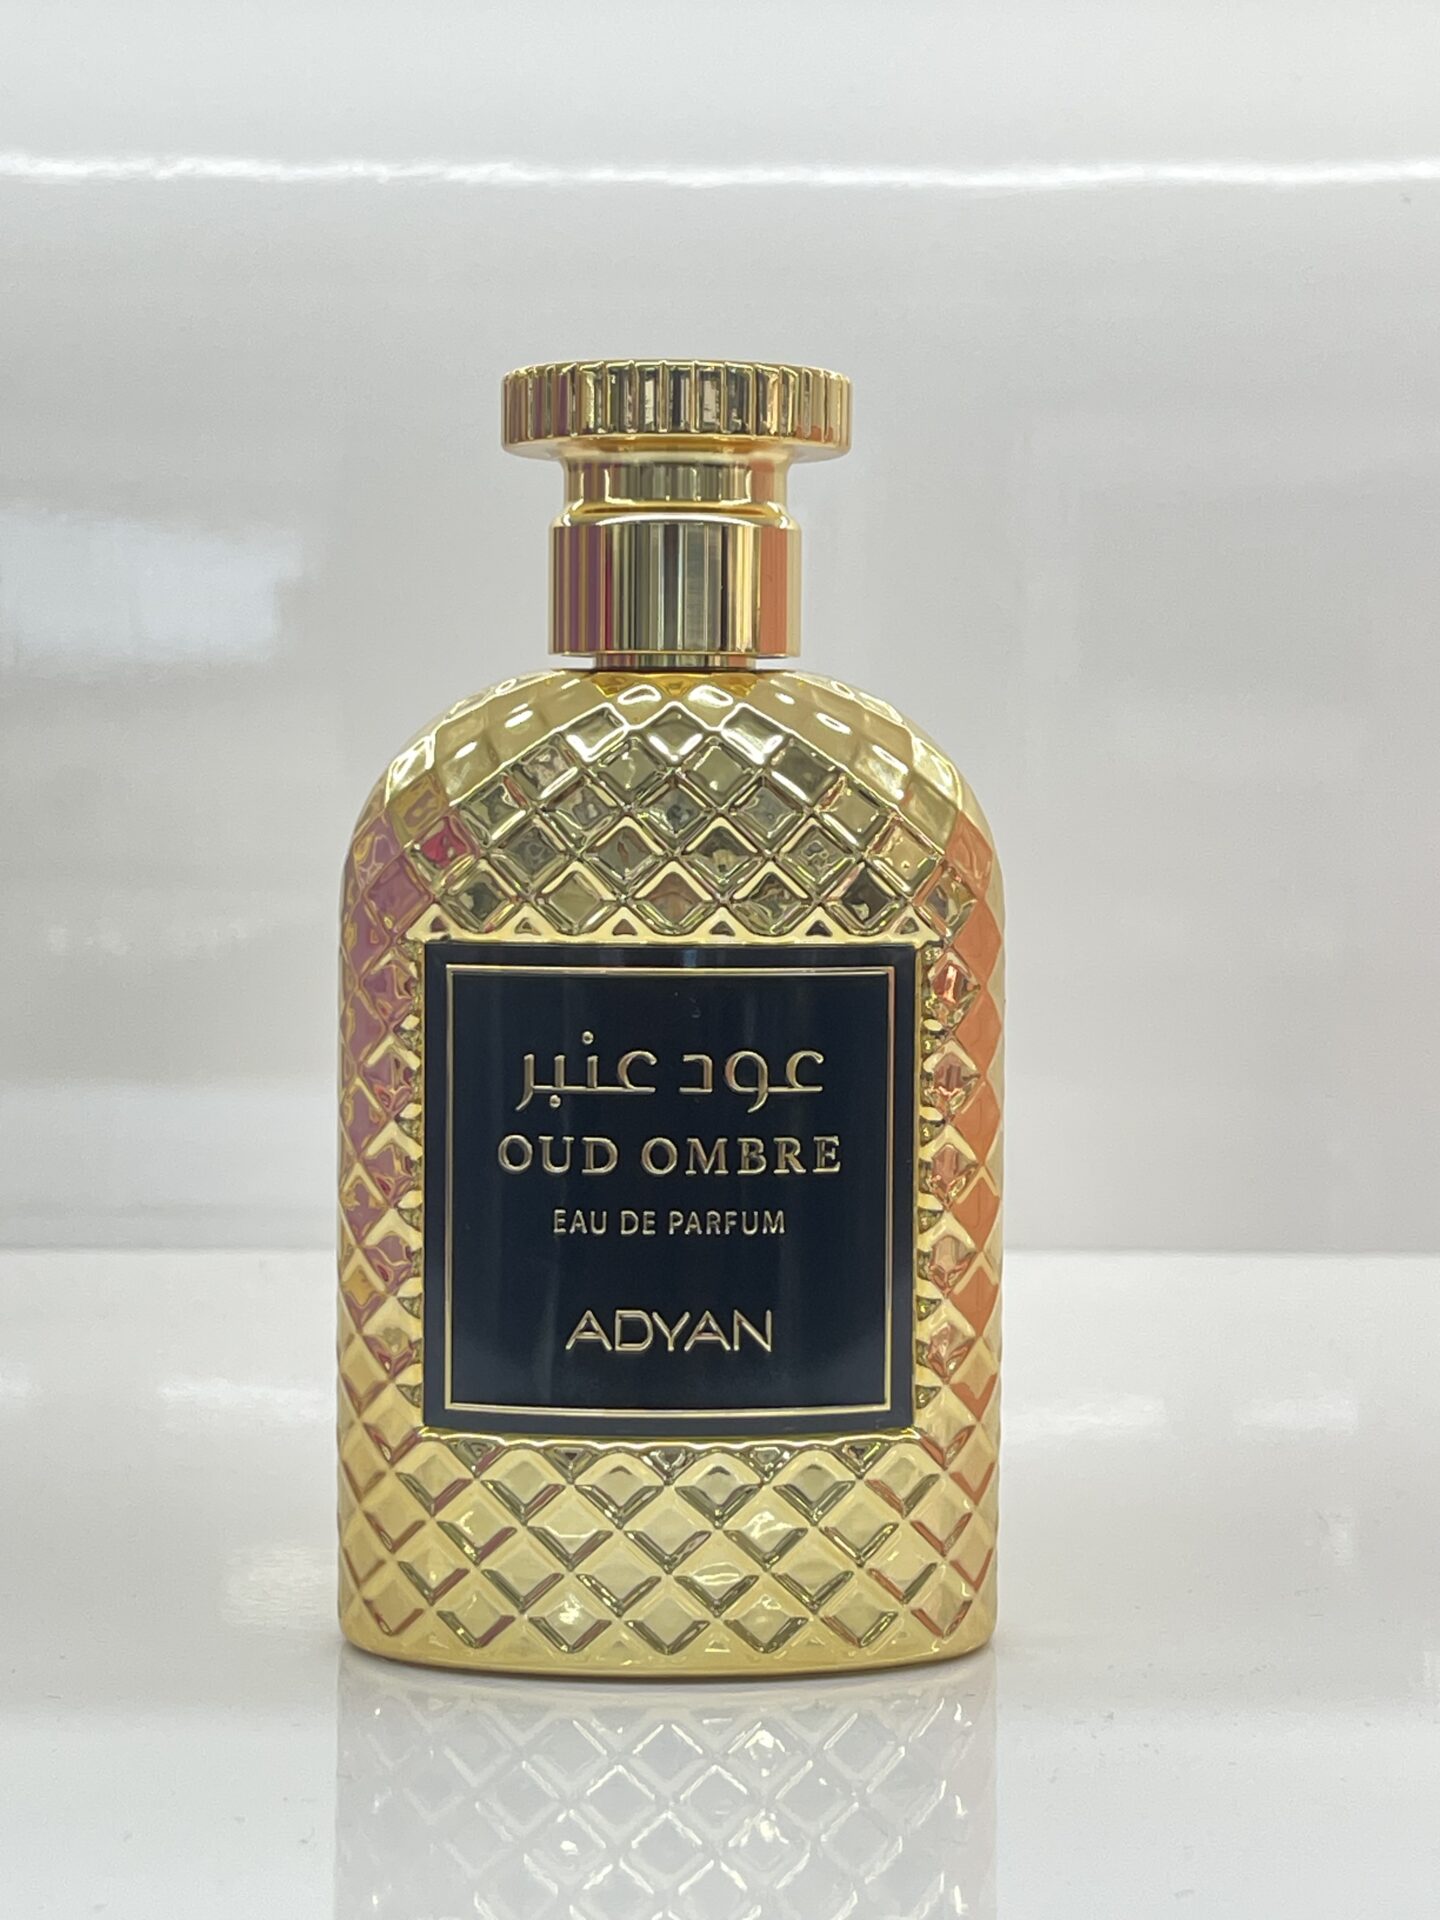 Oud Intense  Inspired By Ombre Nomade - ScentsNSecrets